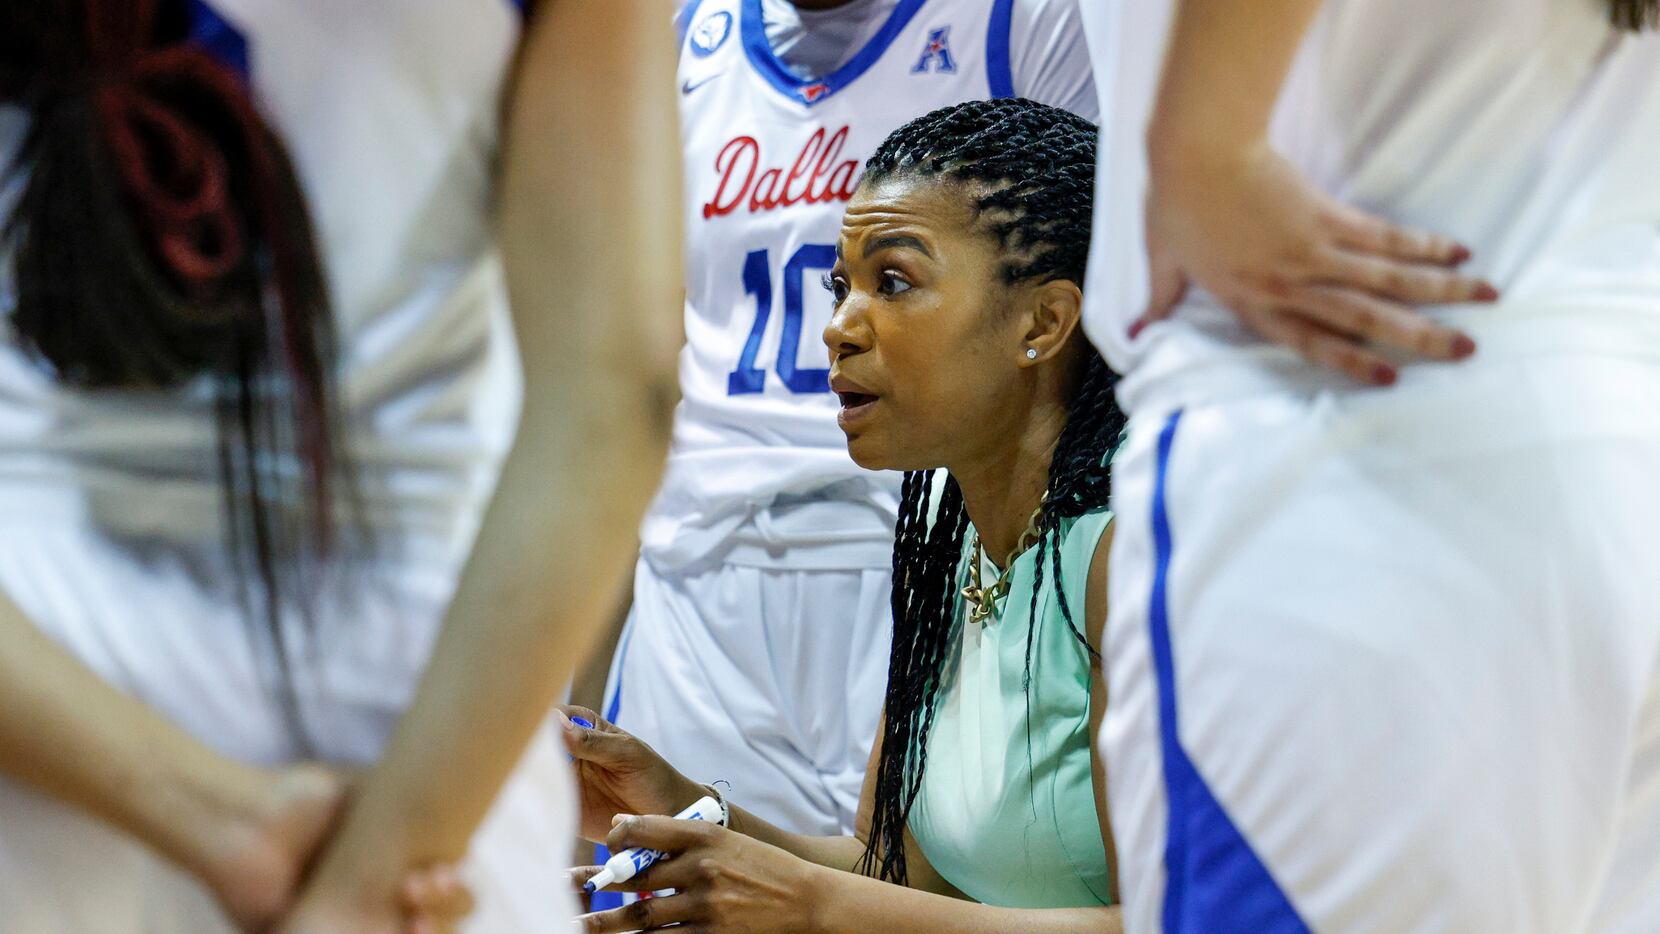 SMU head coach Toyelle Wilson talks with the team during a timeout in the third quarter of a...